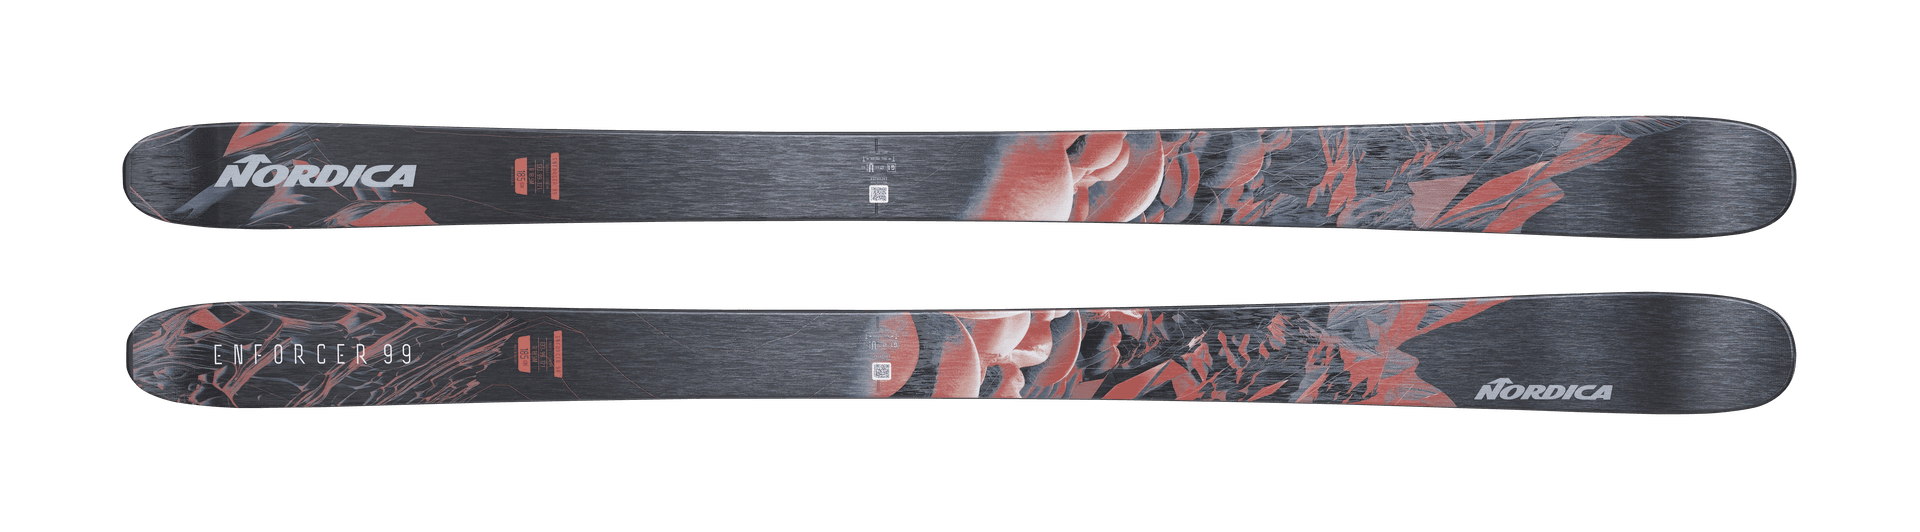 Picture of the Nordica Enforcer 99 skis.